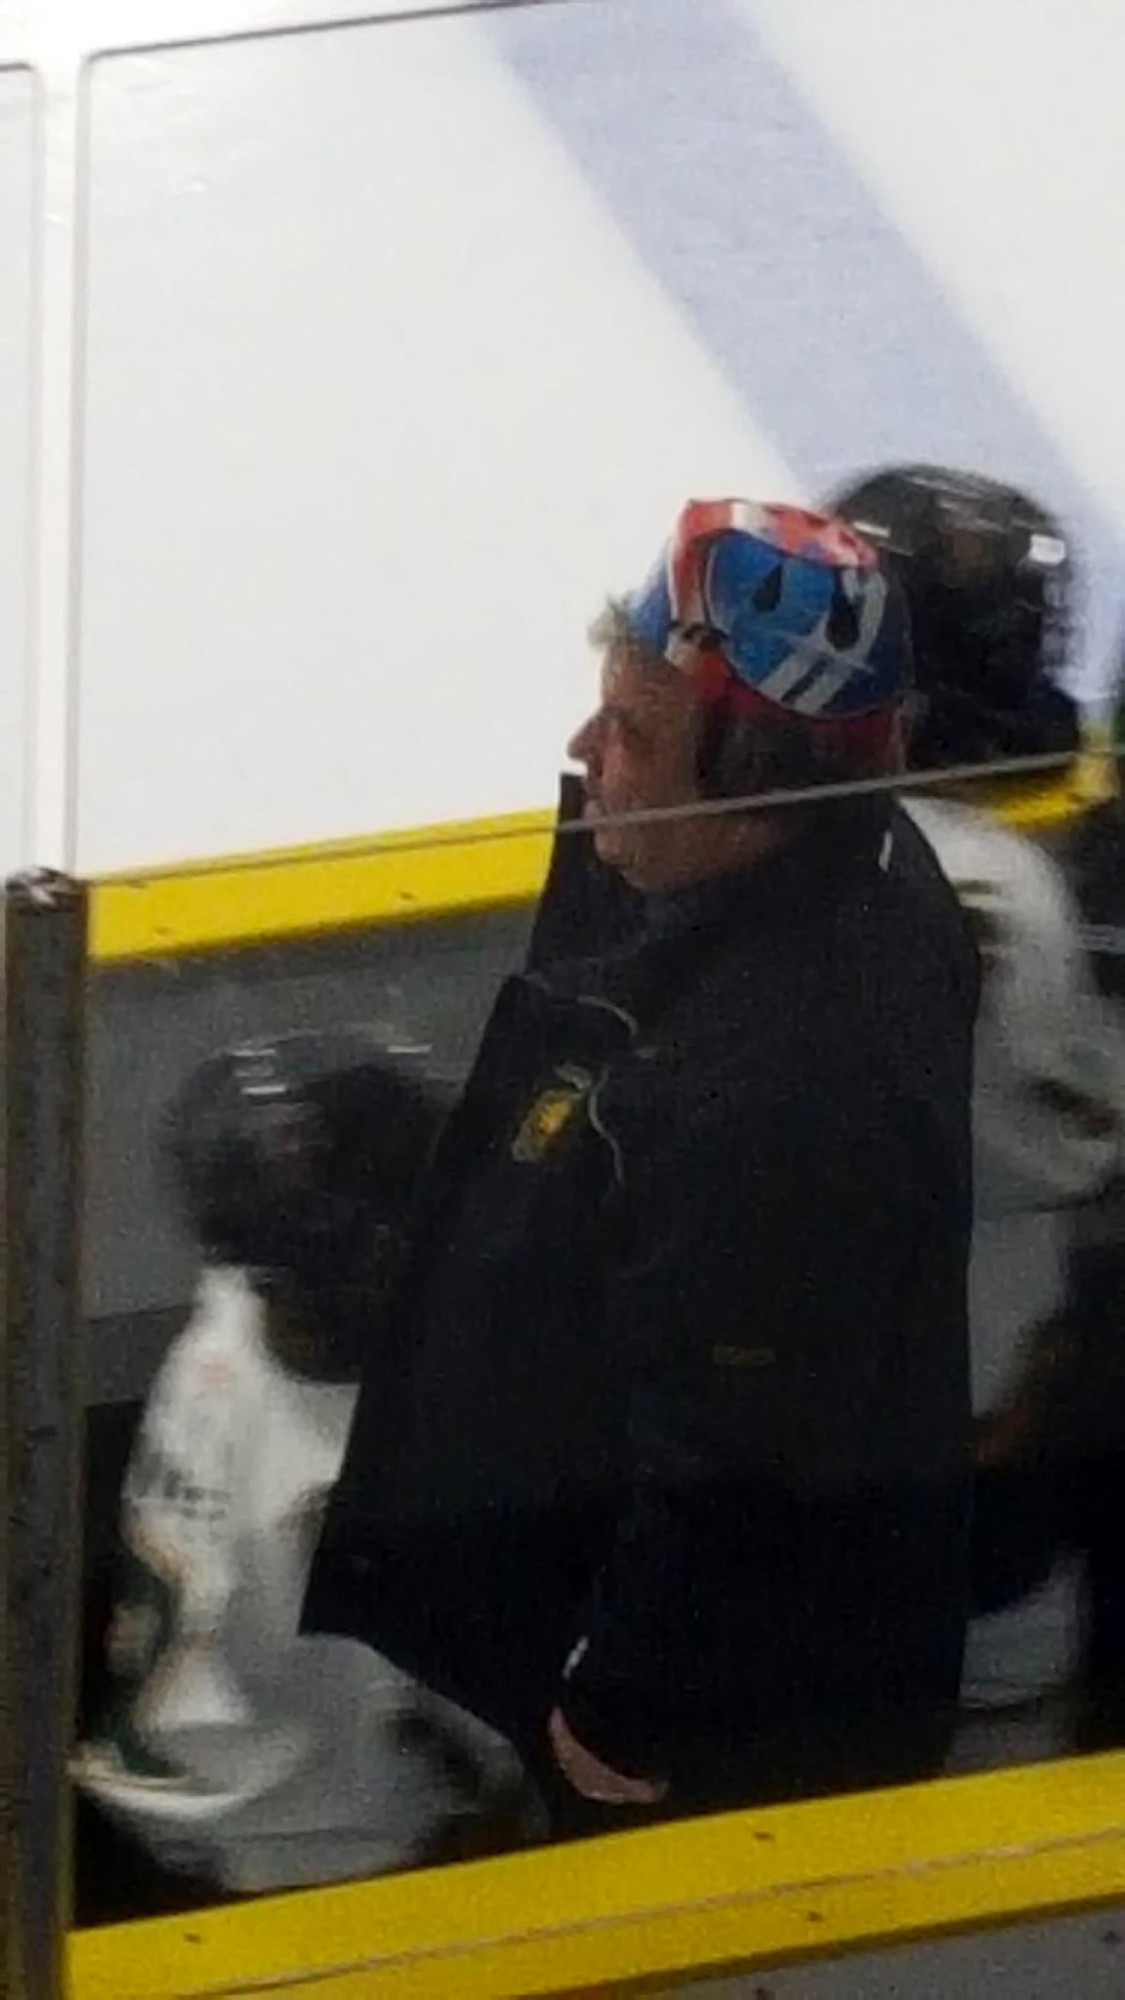 Coach_Darrel_Promised_to_Wear_the_Boston_Pizza_Helmet_for_Championship_Game.jpg